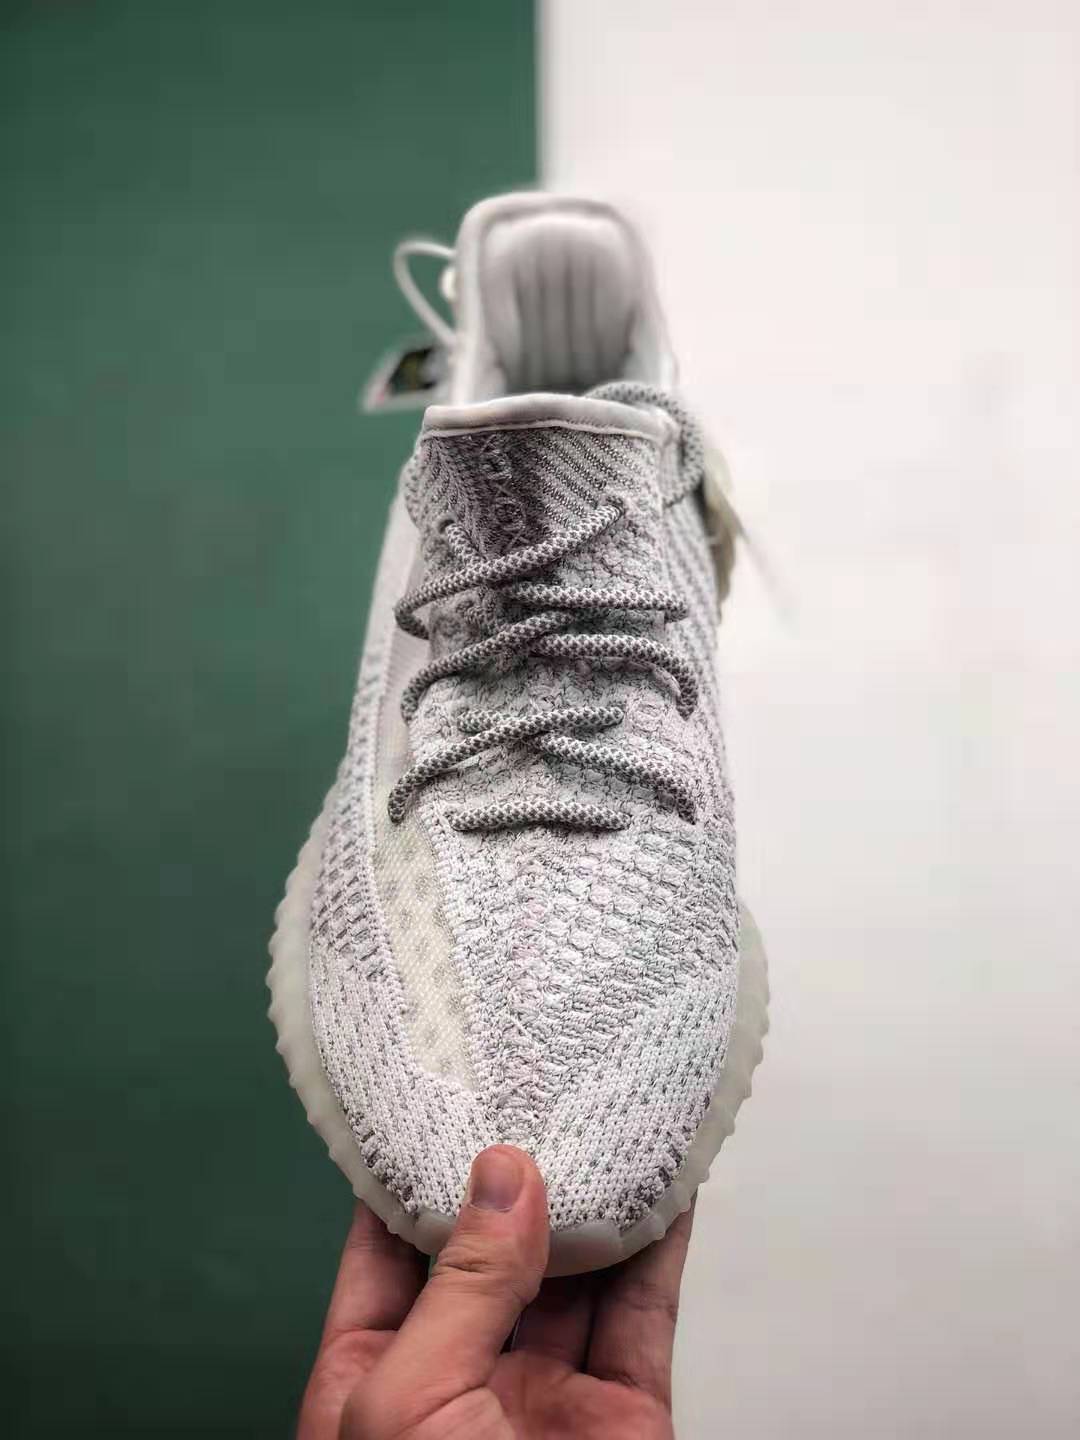 Adidas Yeezy Boost 350 V2 Static Reflective EF2367: Limited Edition Comfort and Style